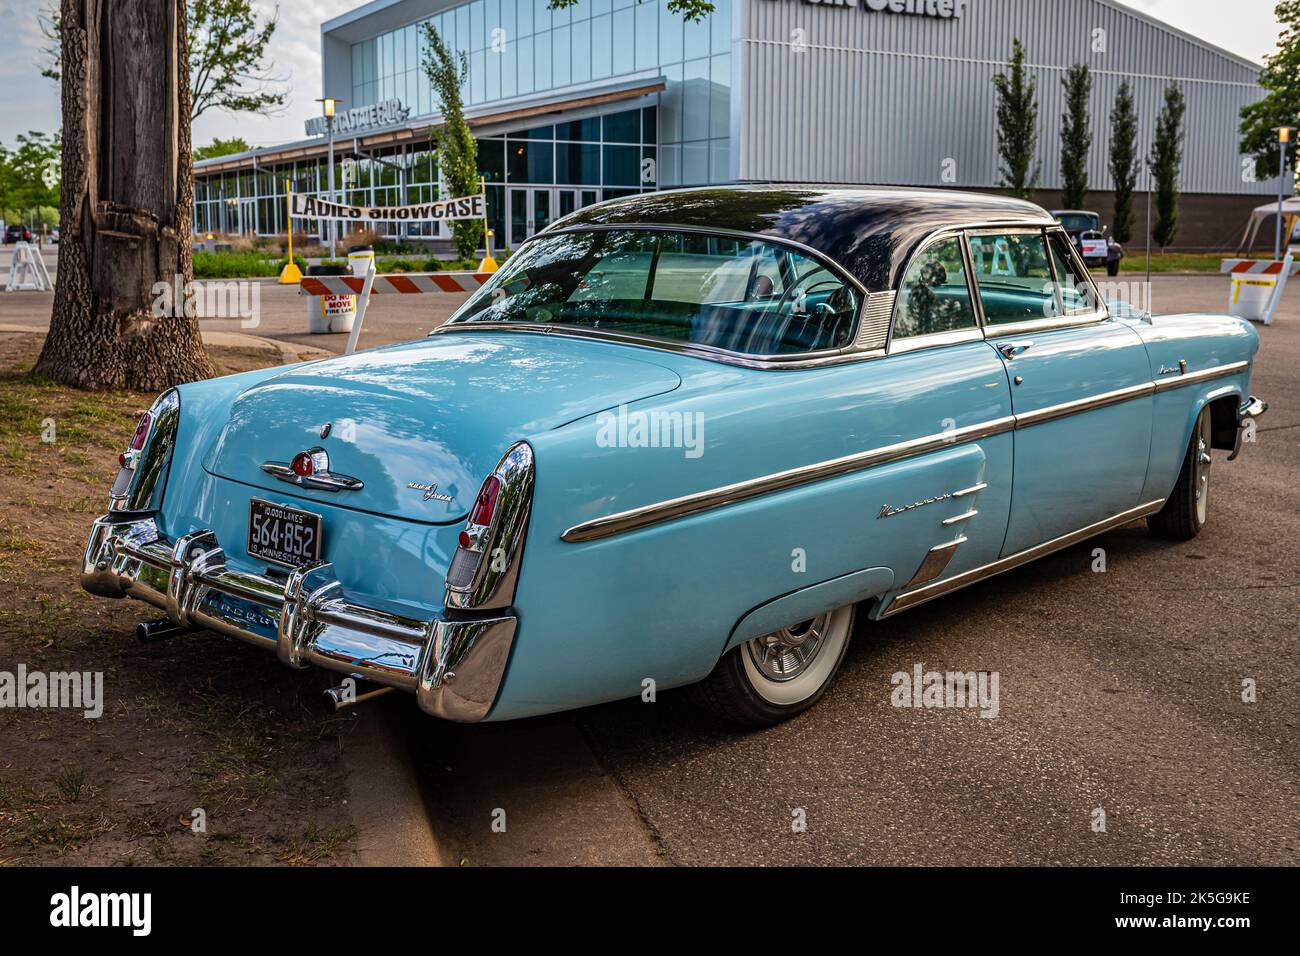 Falcon Heights, MN - June 19, 2022: High perspective rear corner view of a 1953 Mercury Monterey Hardtop Coupe at a local car show. Stock Photo